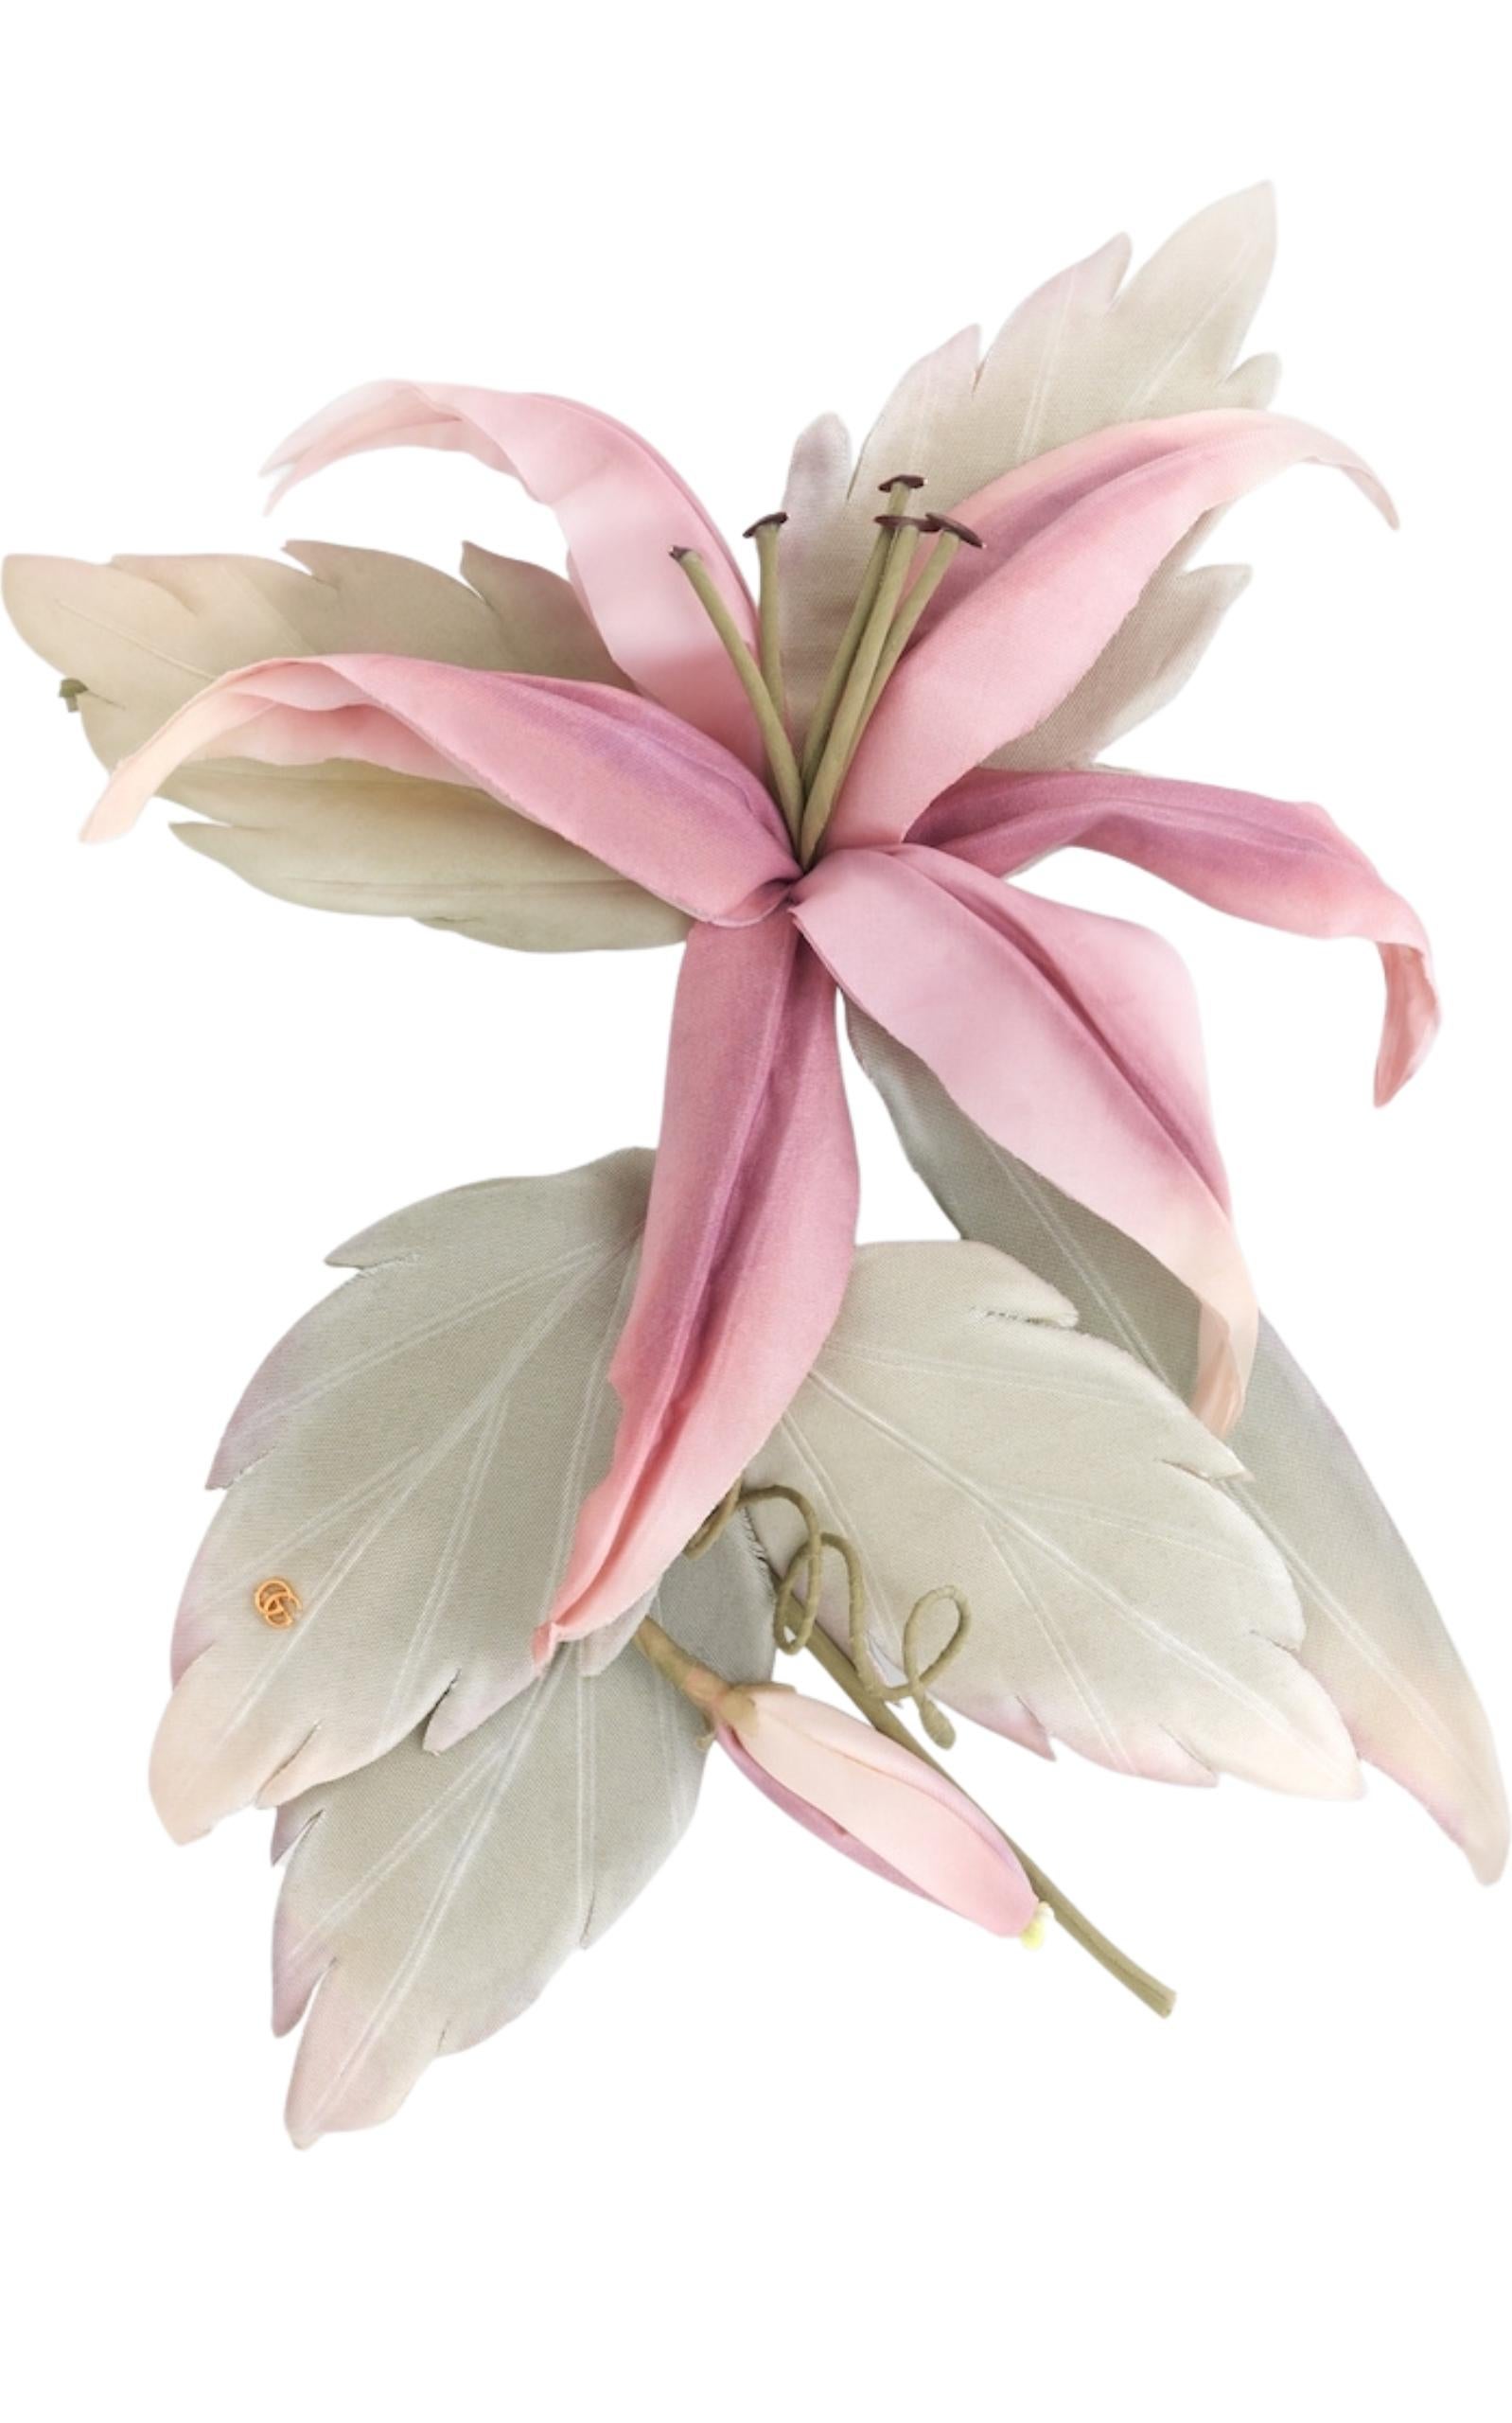 Blooming pink and white flower, crafted from cotton and silk.
Metal with gold-toned finish.
Double G.
Pin closure. 13.8